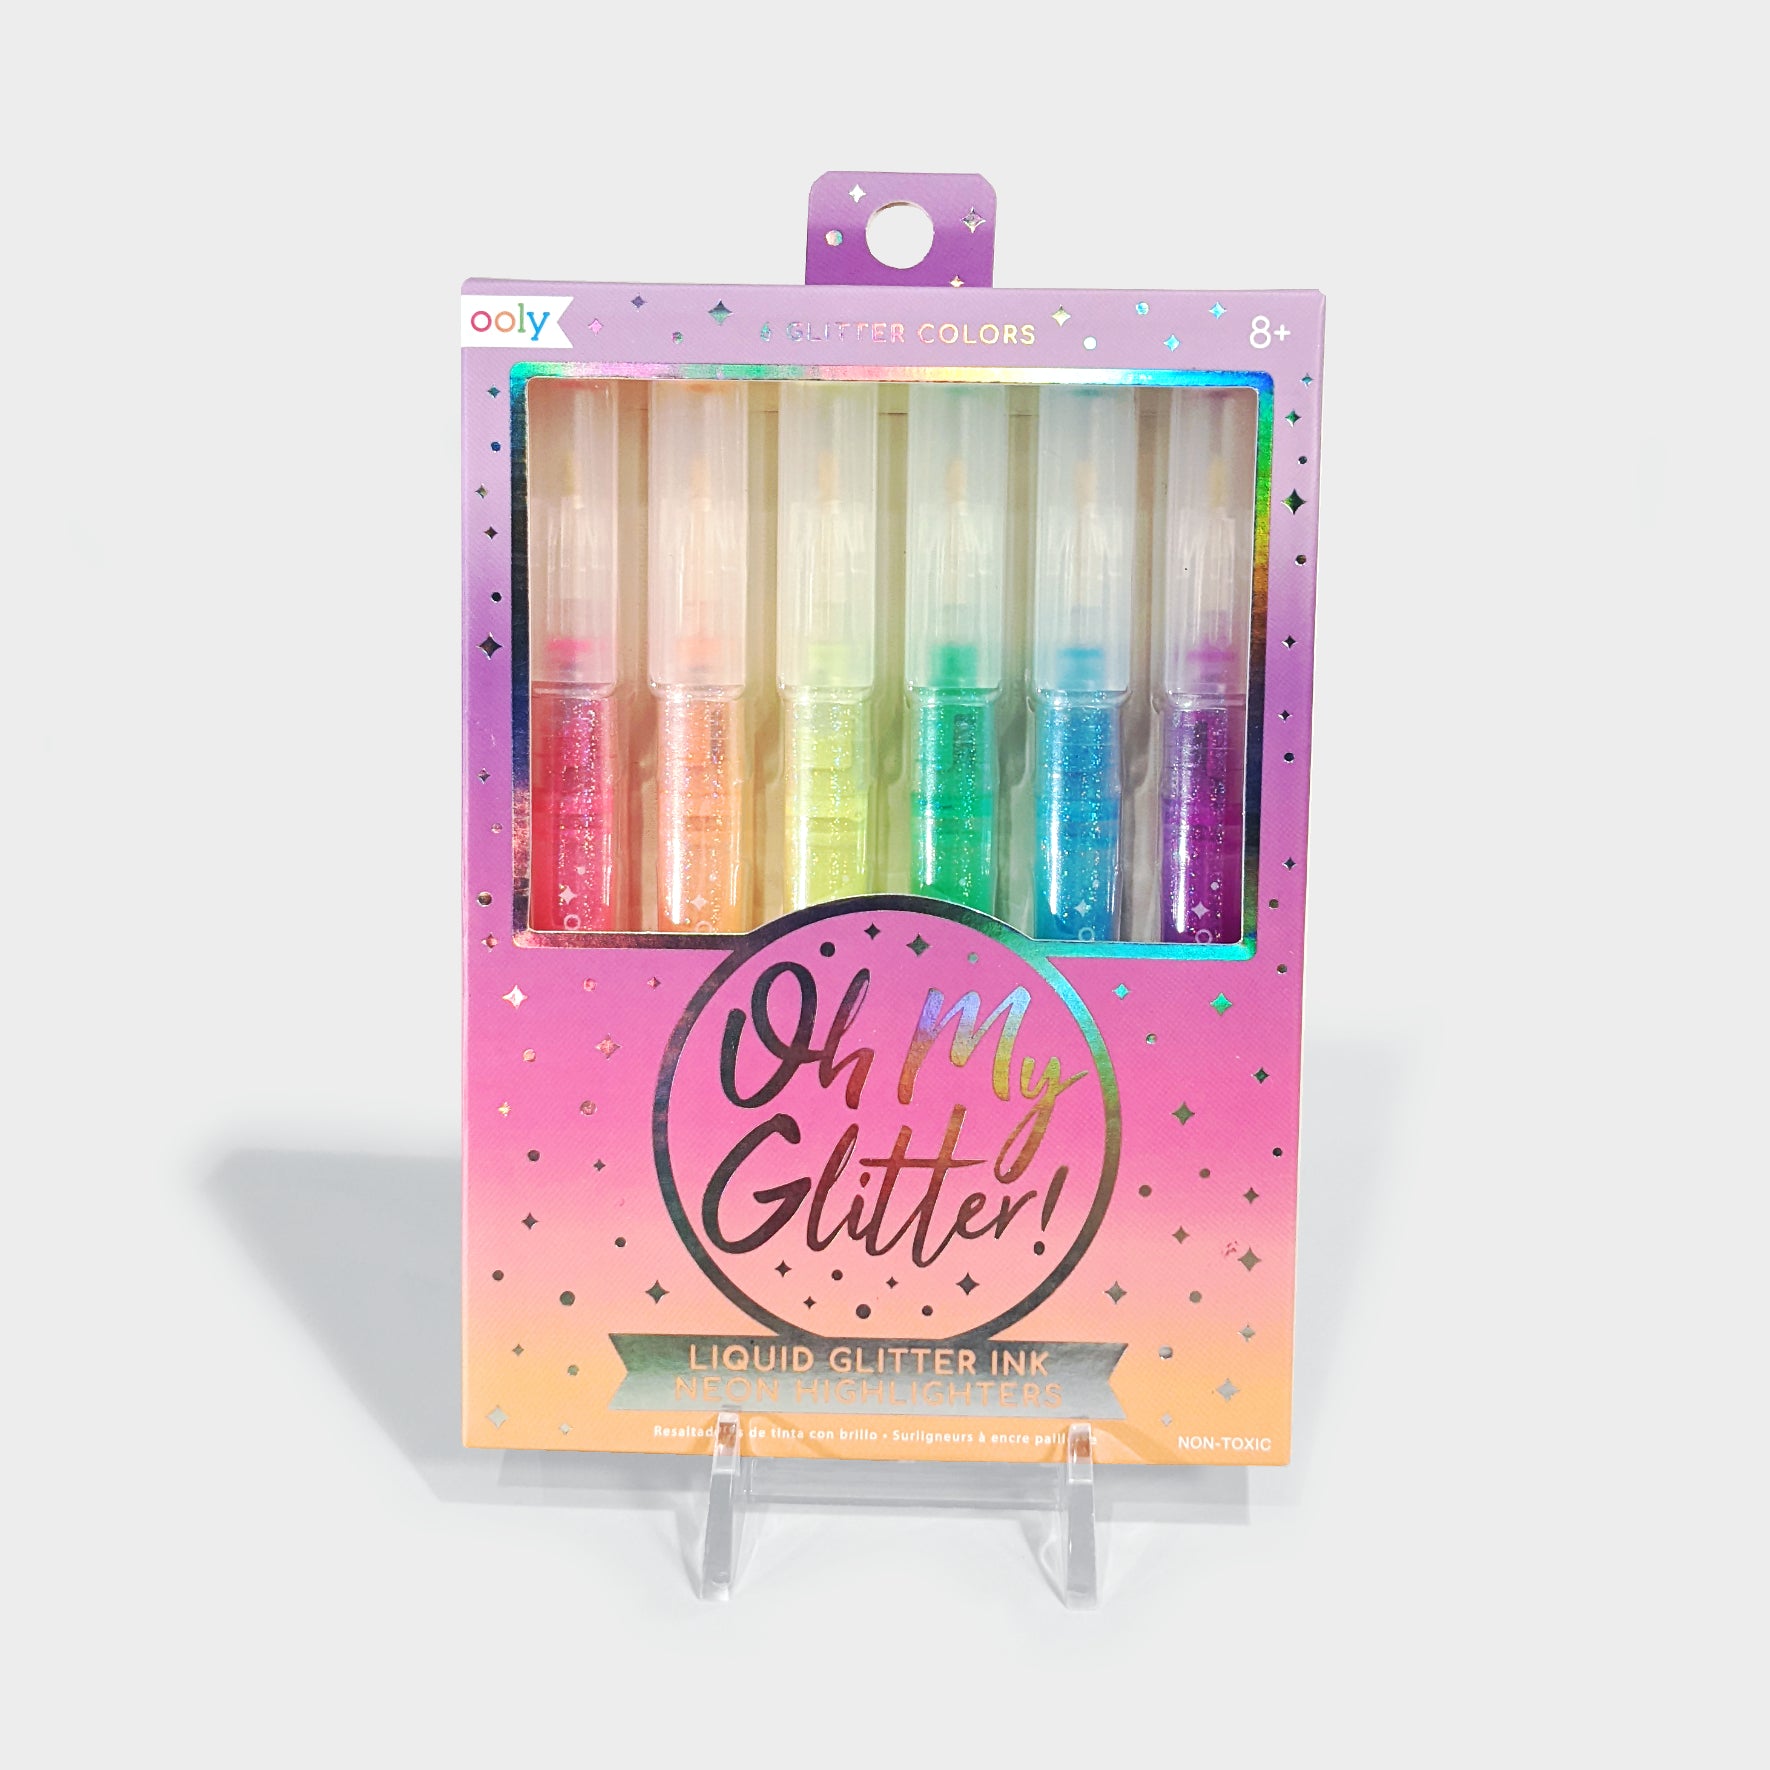 Radiant Writers Glitter Gel Pens by OOLY